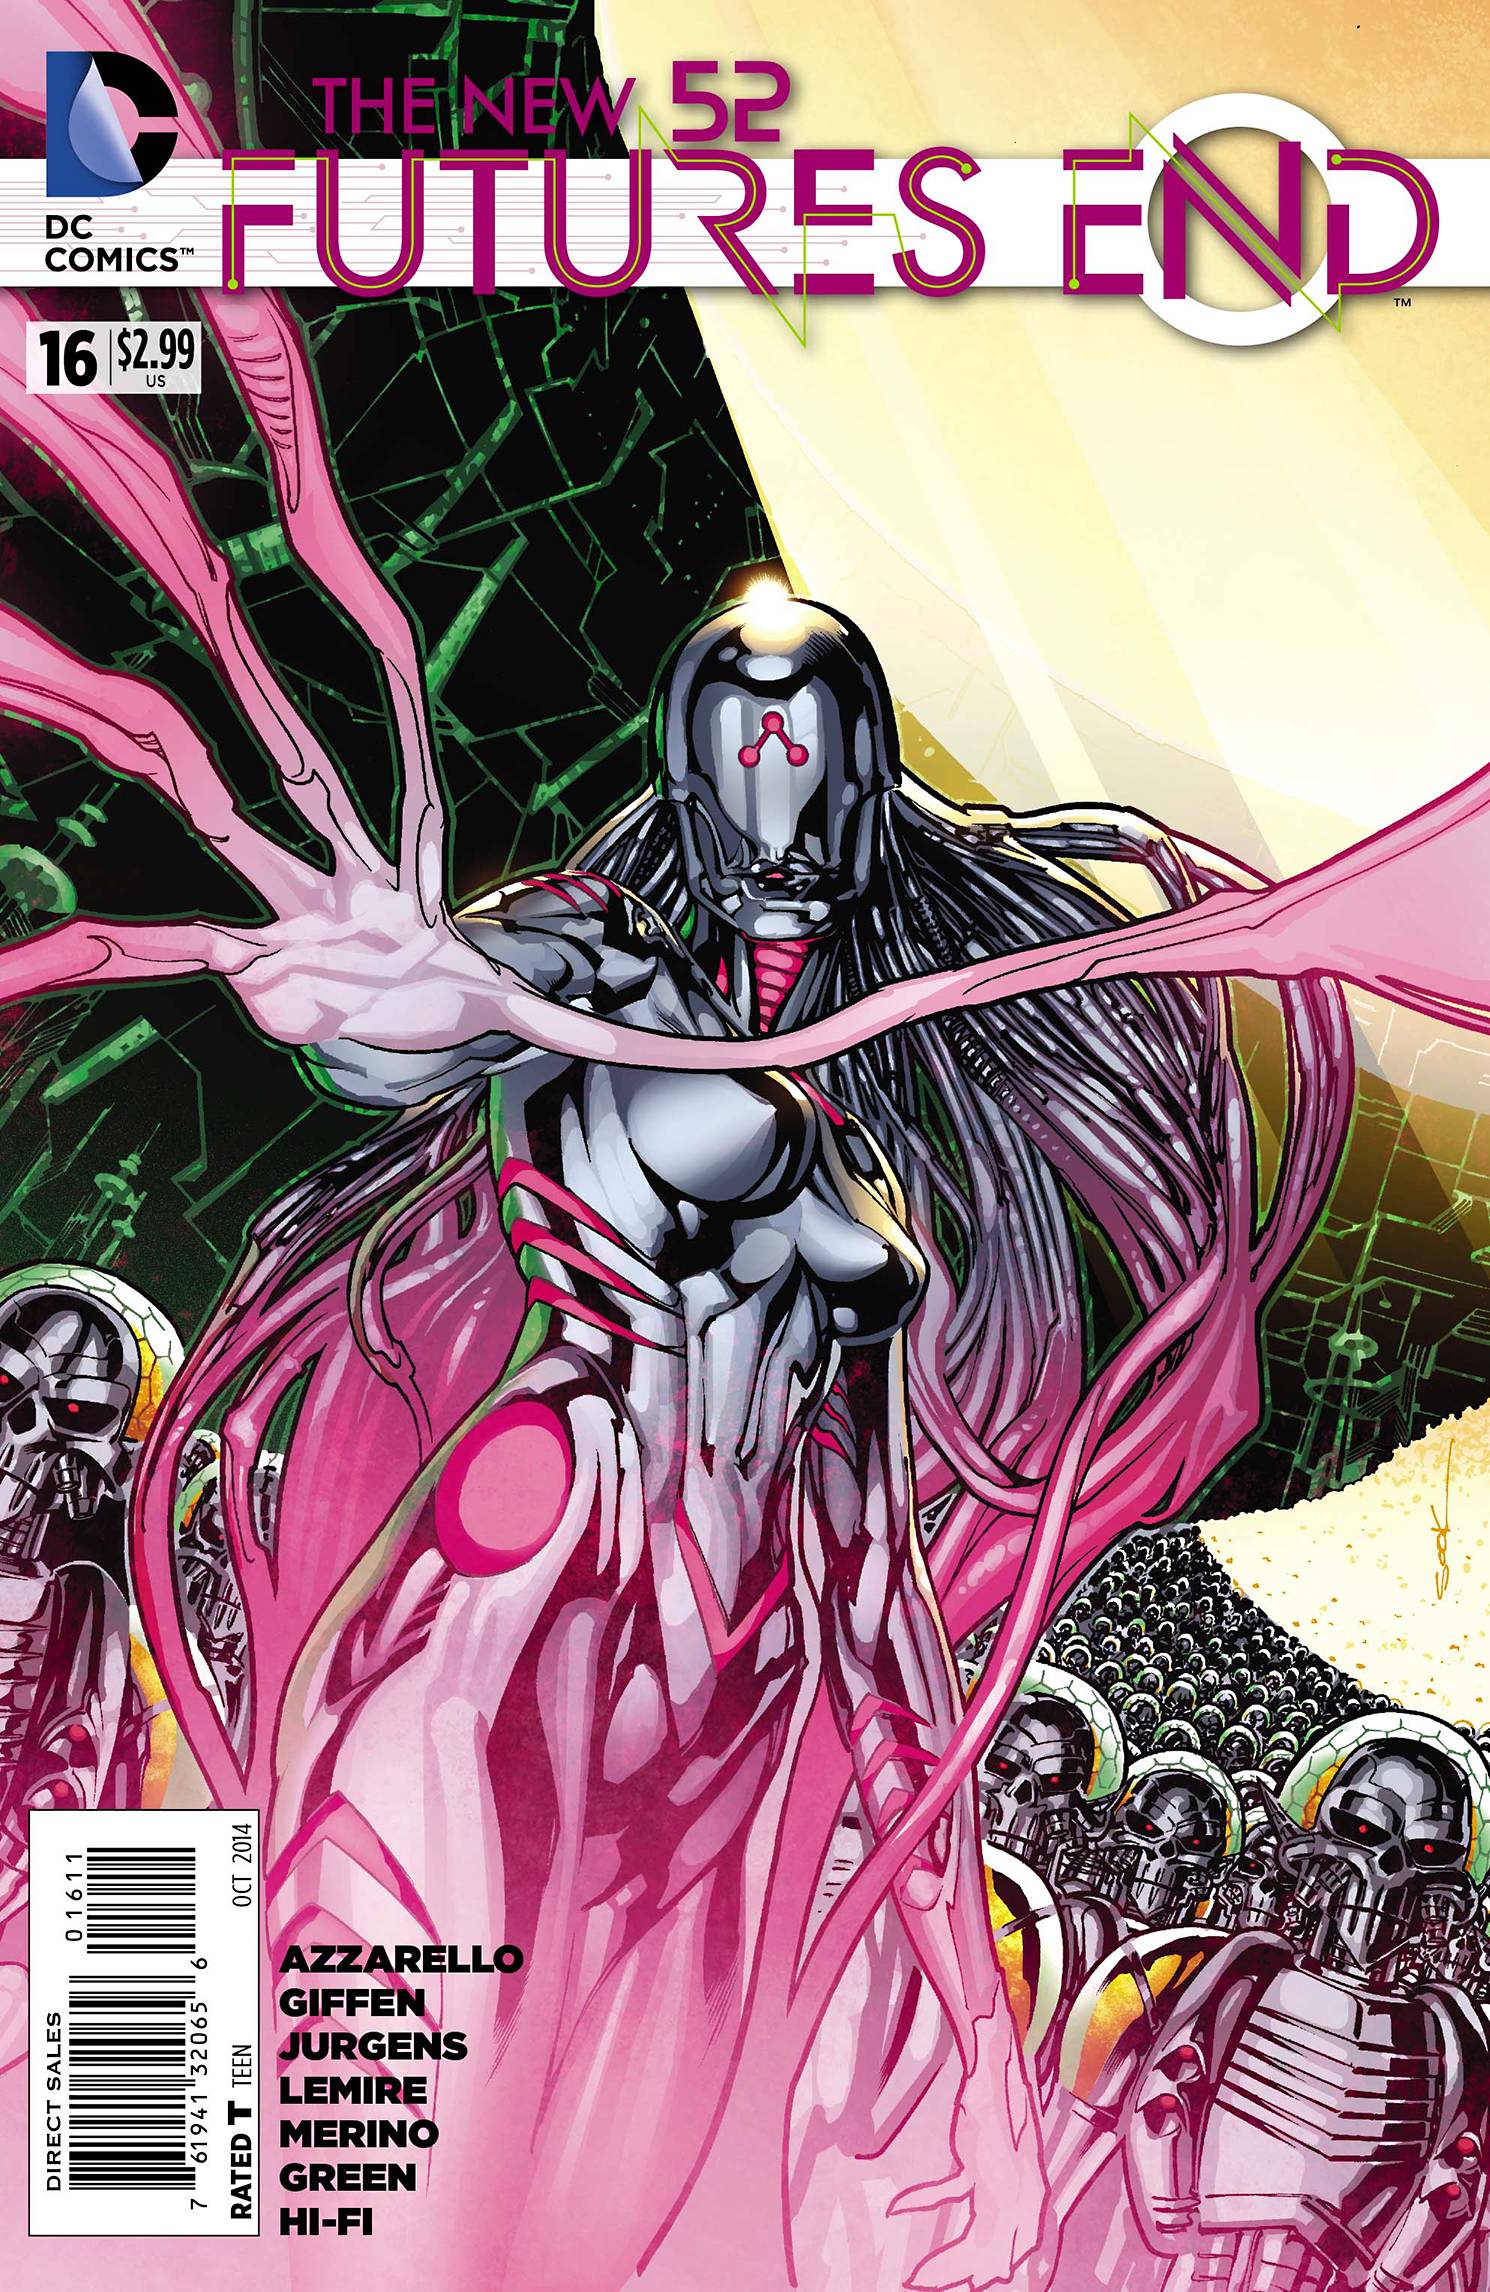 New 52 Futures End #16 (Weekly)